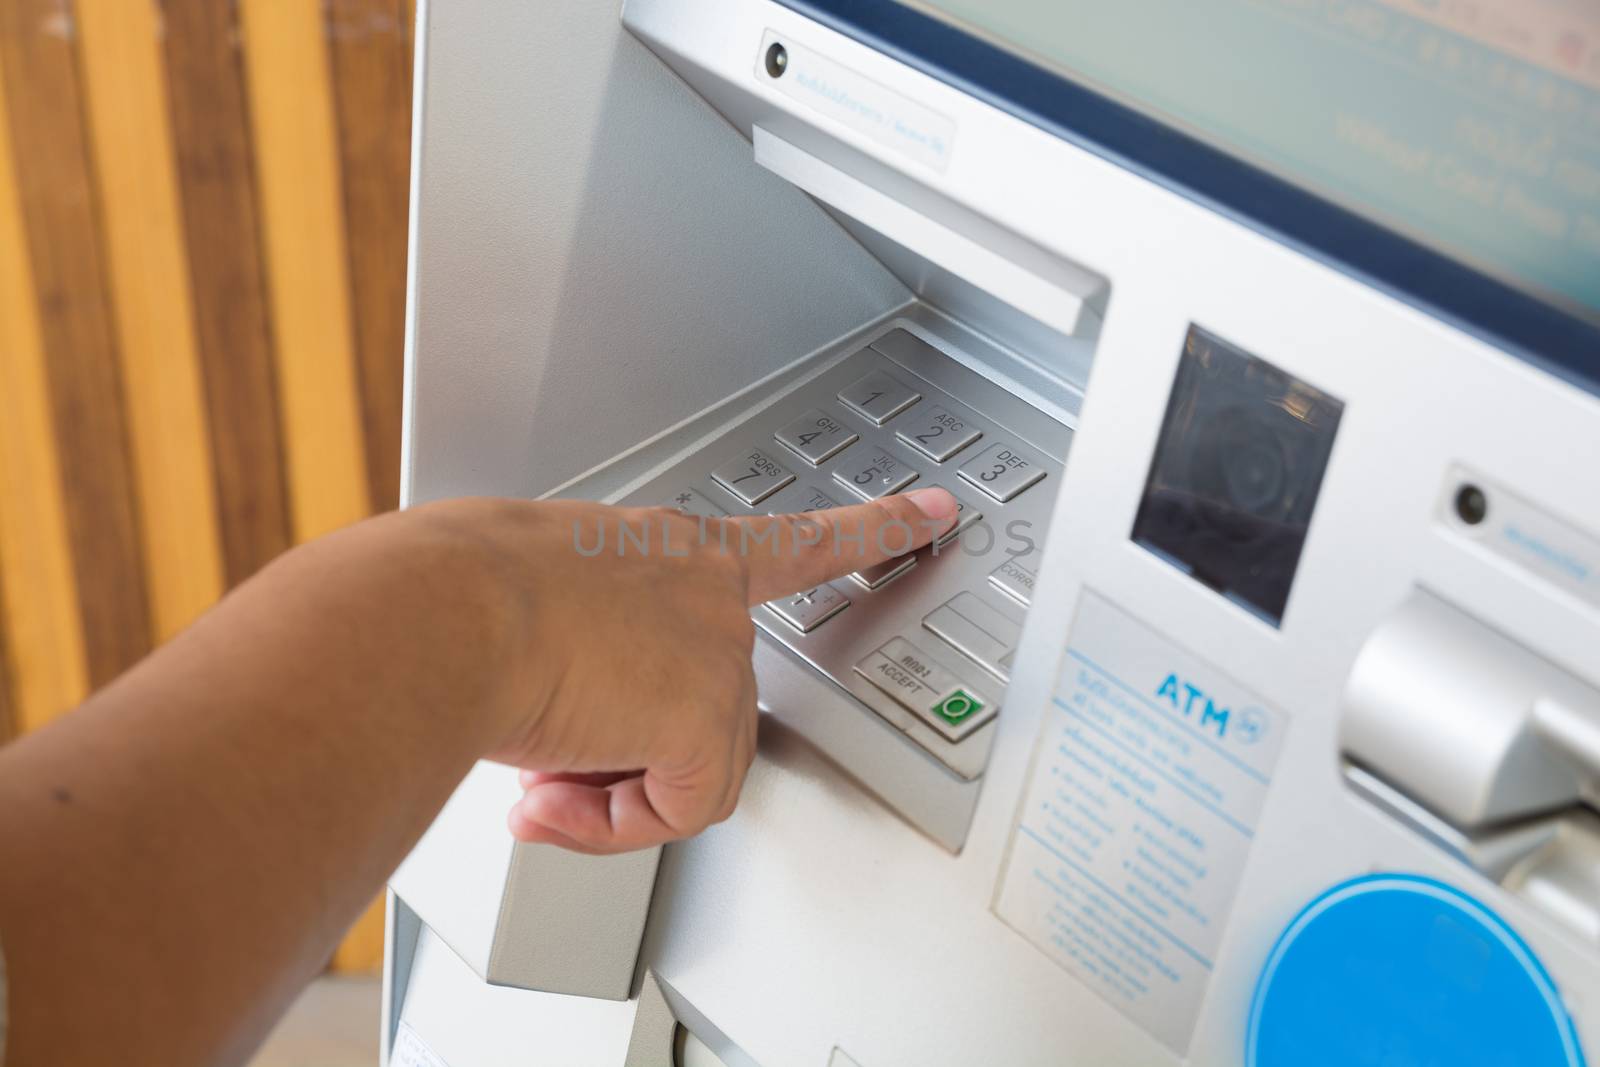 Keyboard Panel of ATM or Autmatic Teller Machine with Female Hand Push ATM Security Pin Code or Password to make Transaction as Modern Financial Technology Security Concept